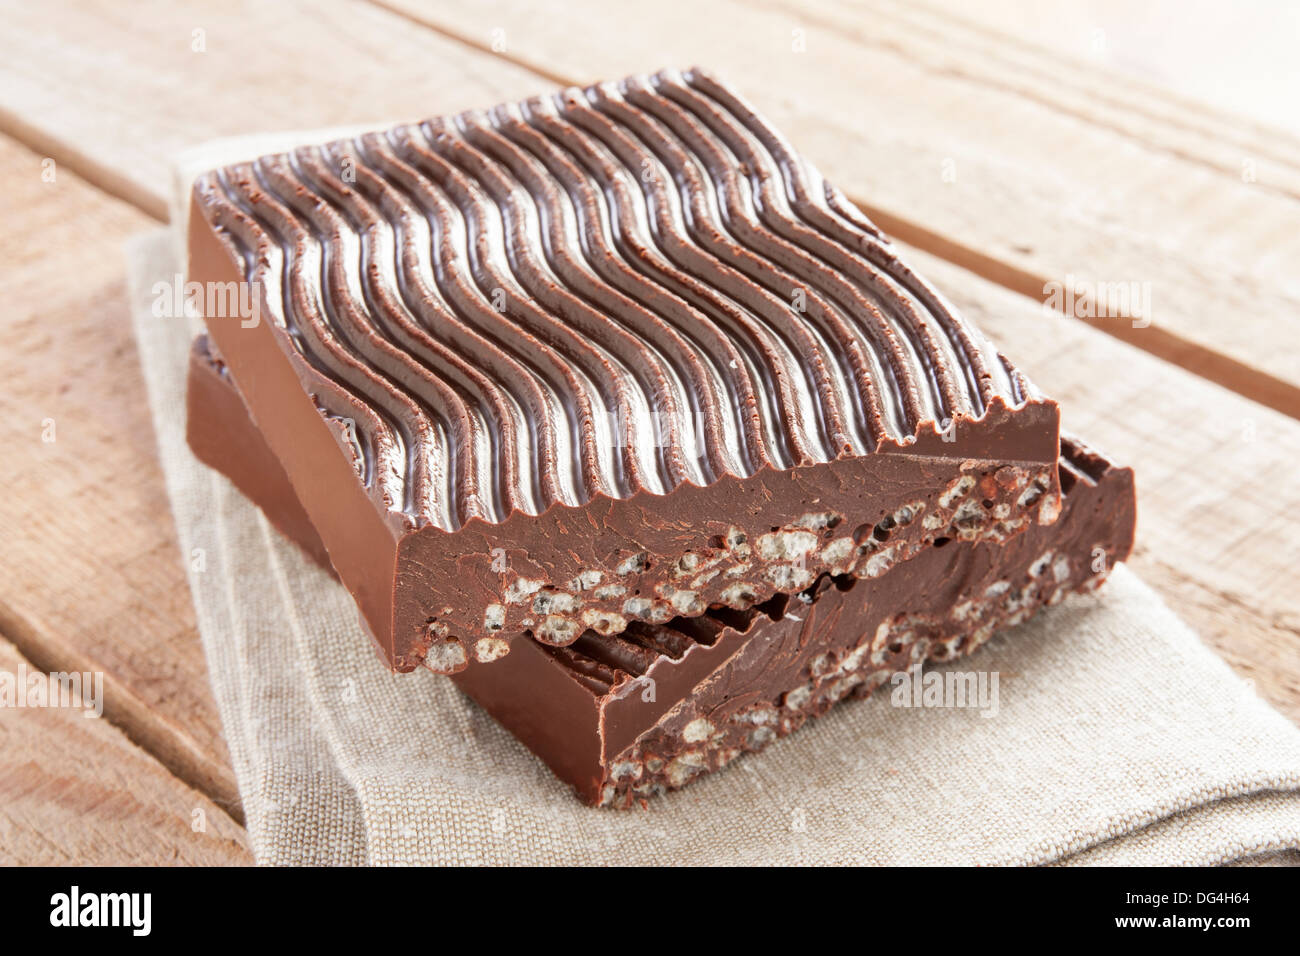 Chocolate with puffed rice on rustic fabric Stock Photo